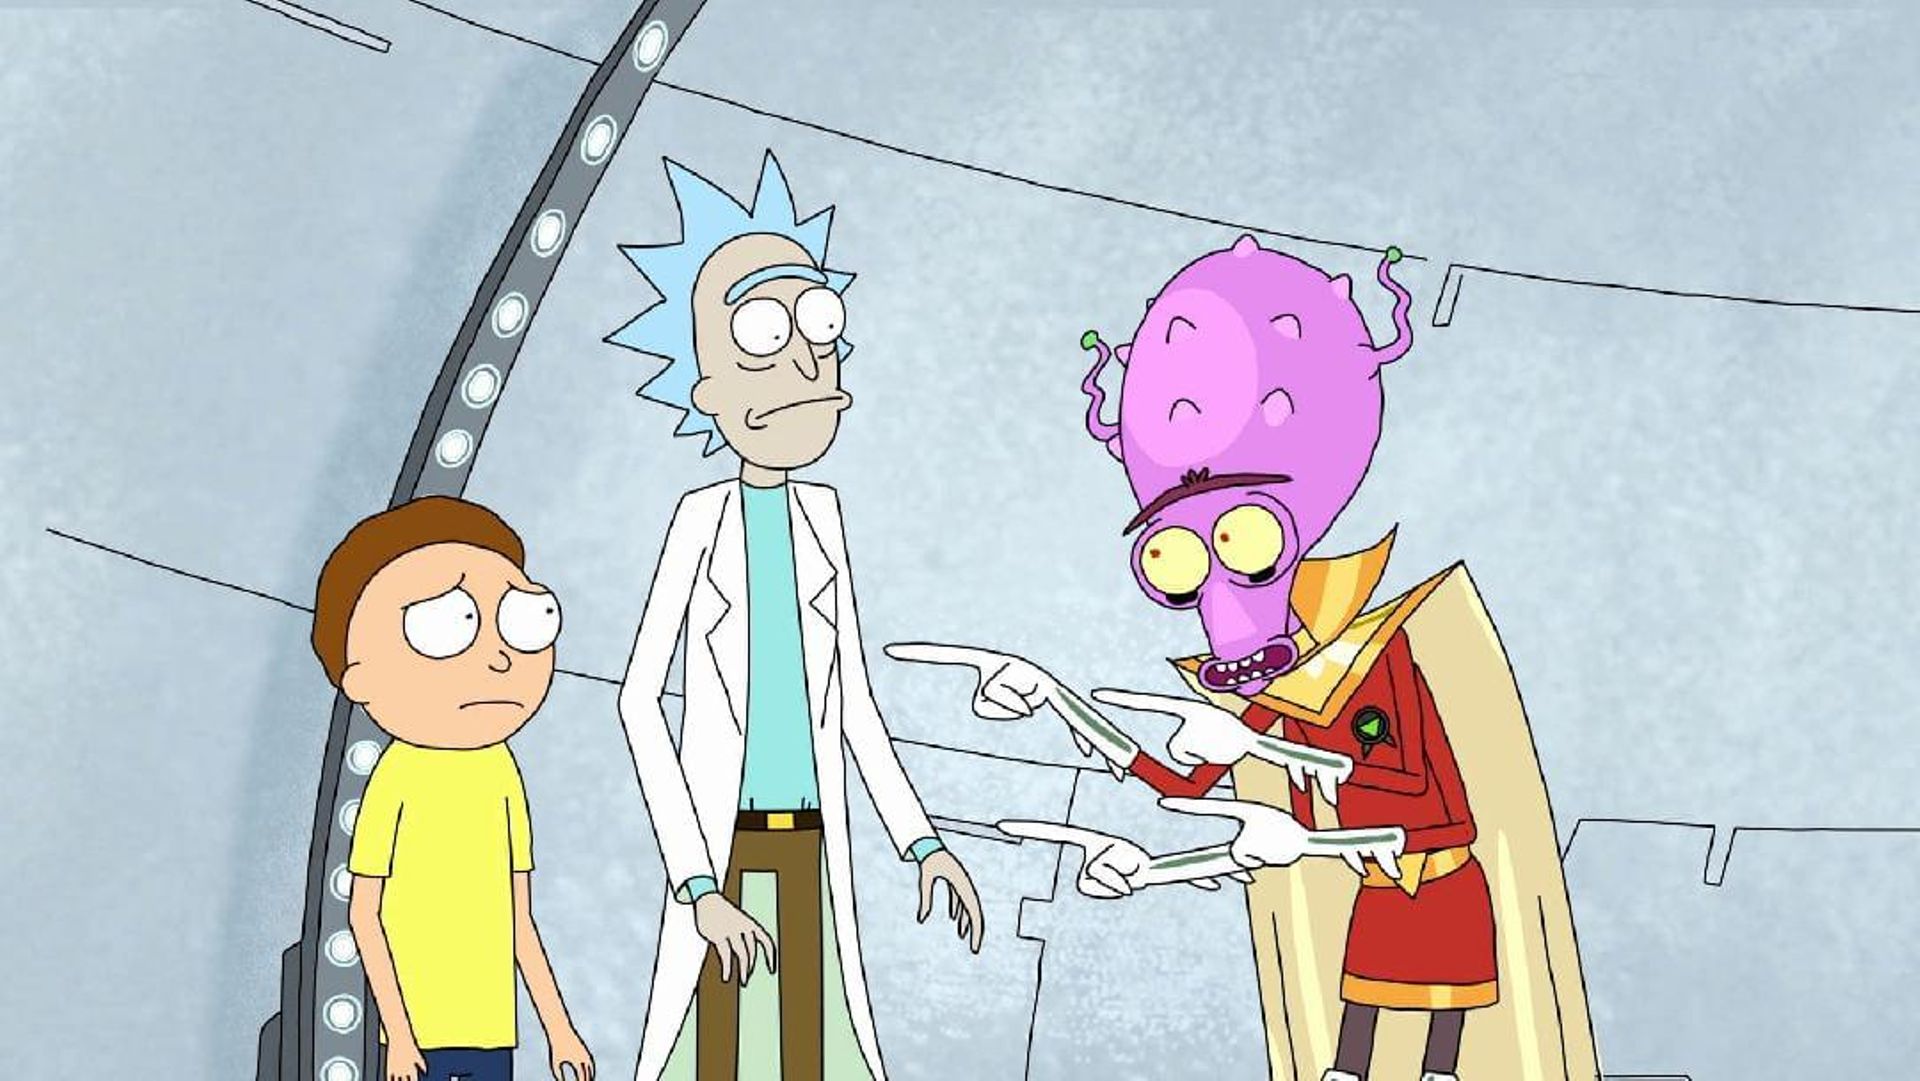 rick and morty season 2 episode 6 online